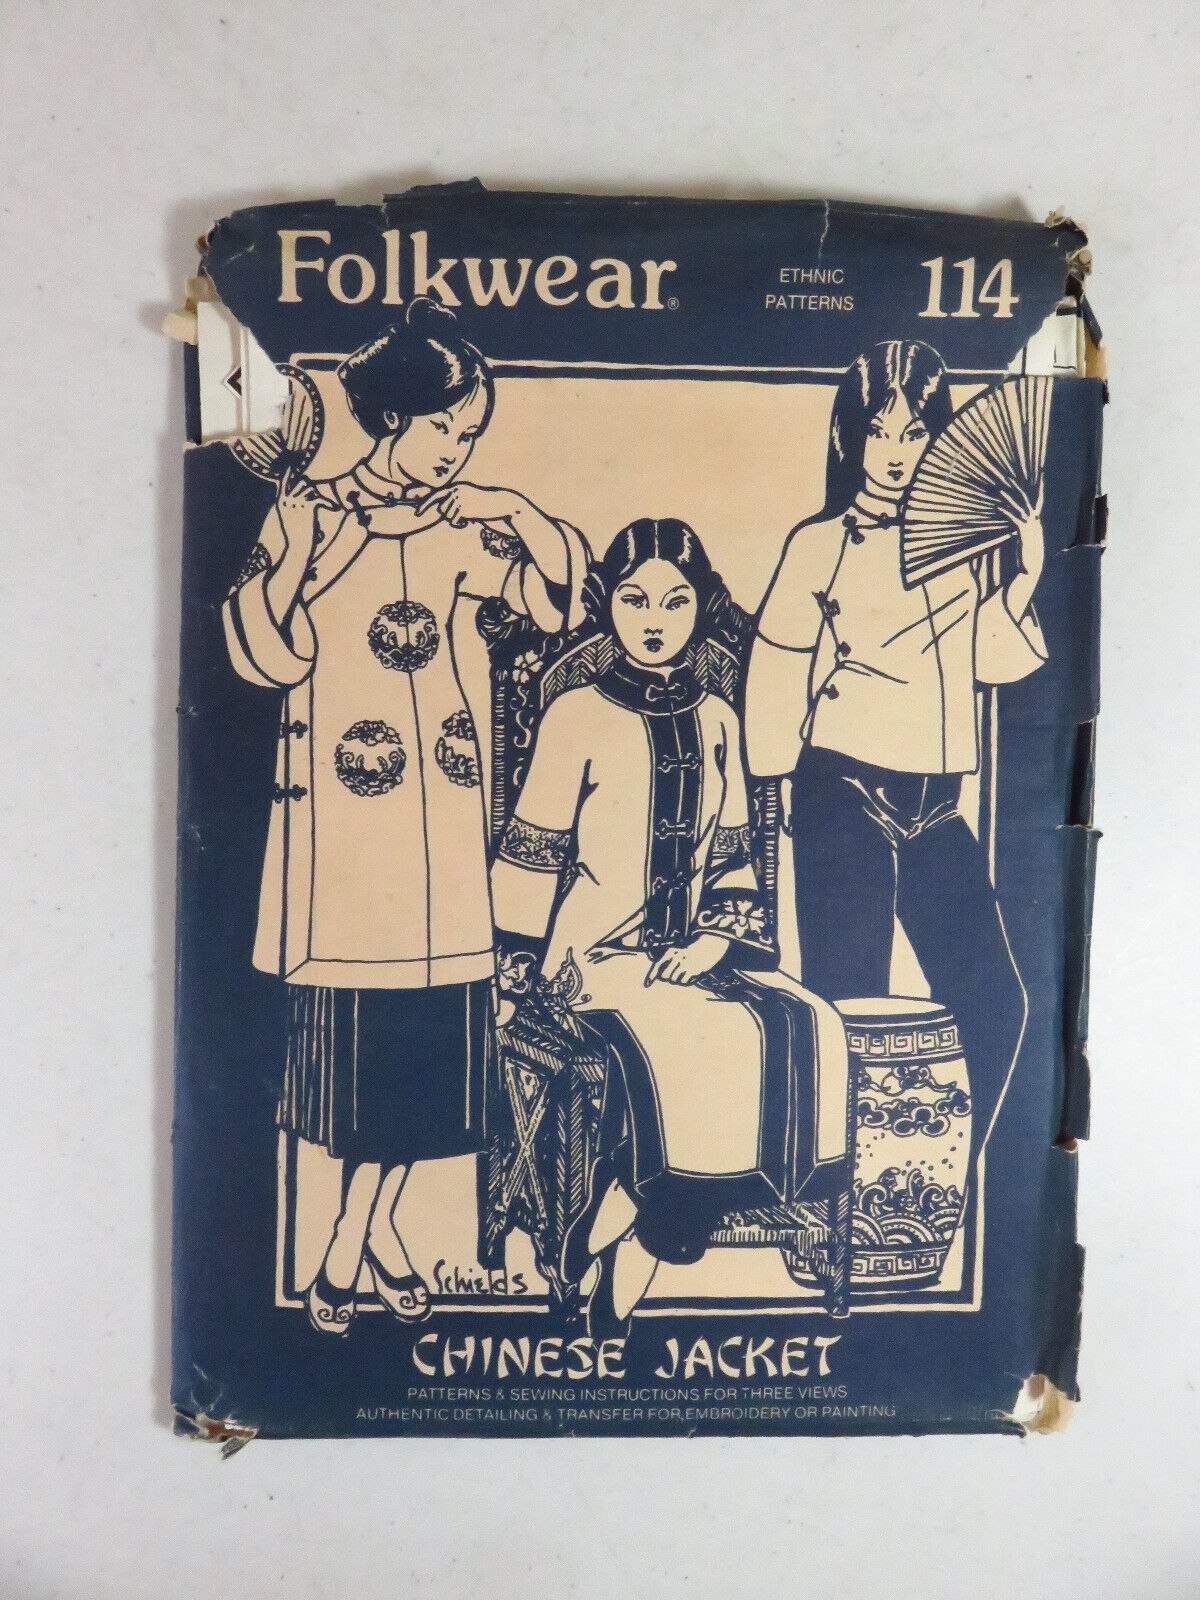 Folkwear Sewing Pattern Ethnic CHINESE JACKET 114 - cut but complete